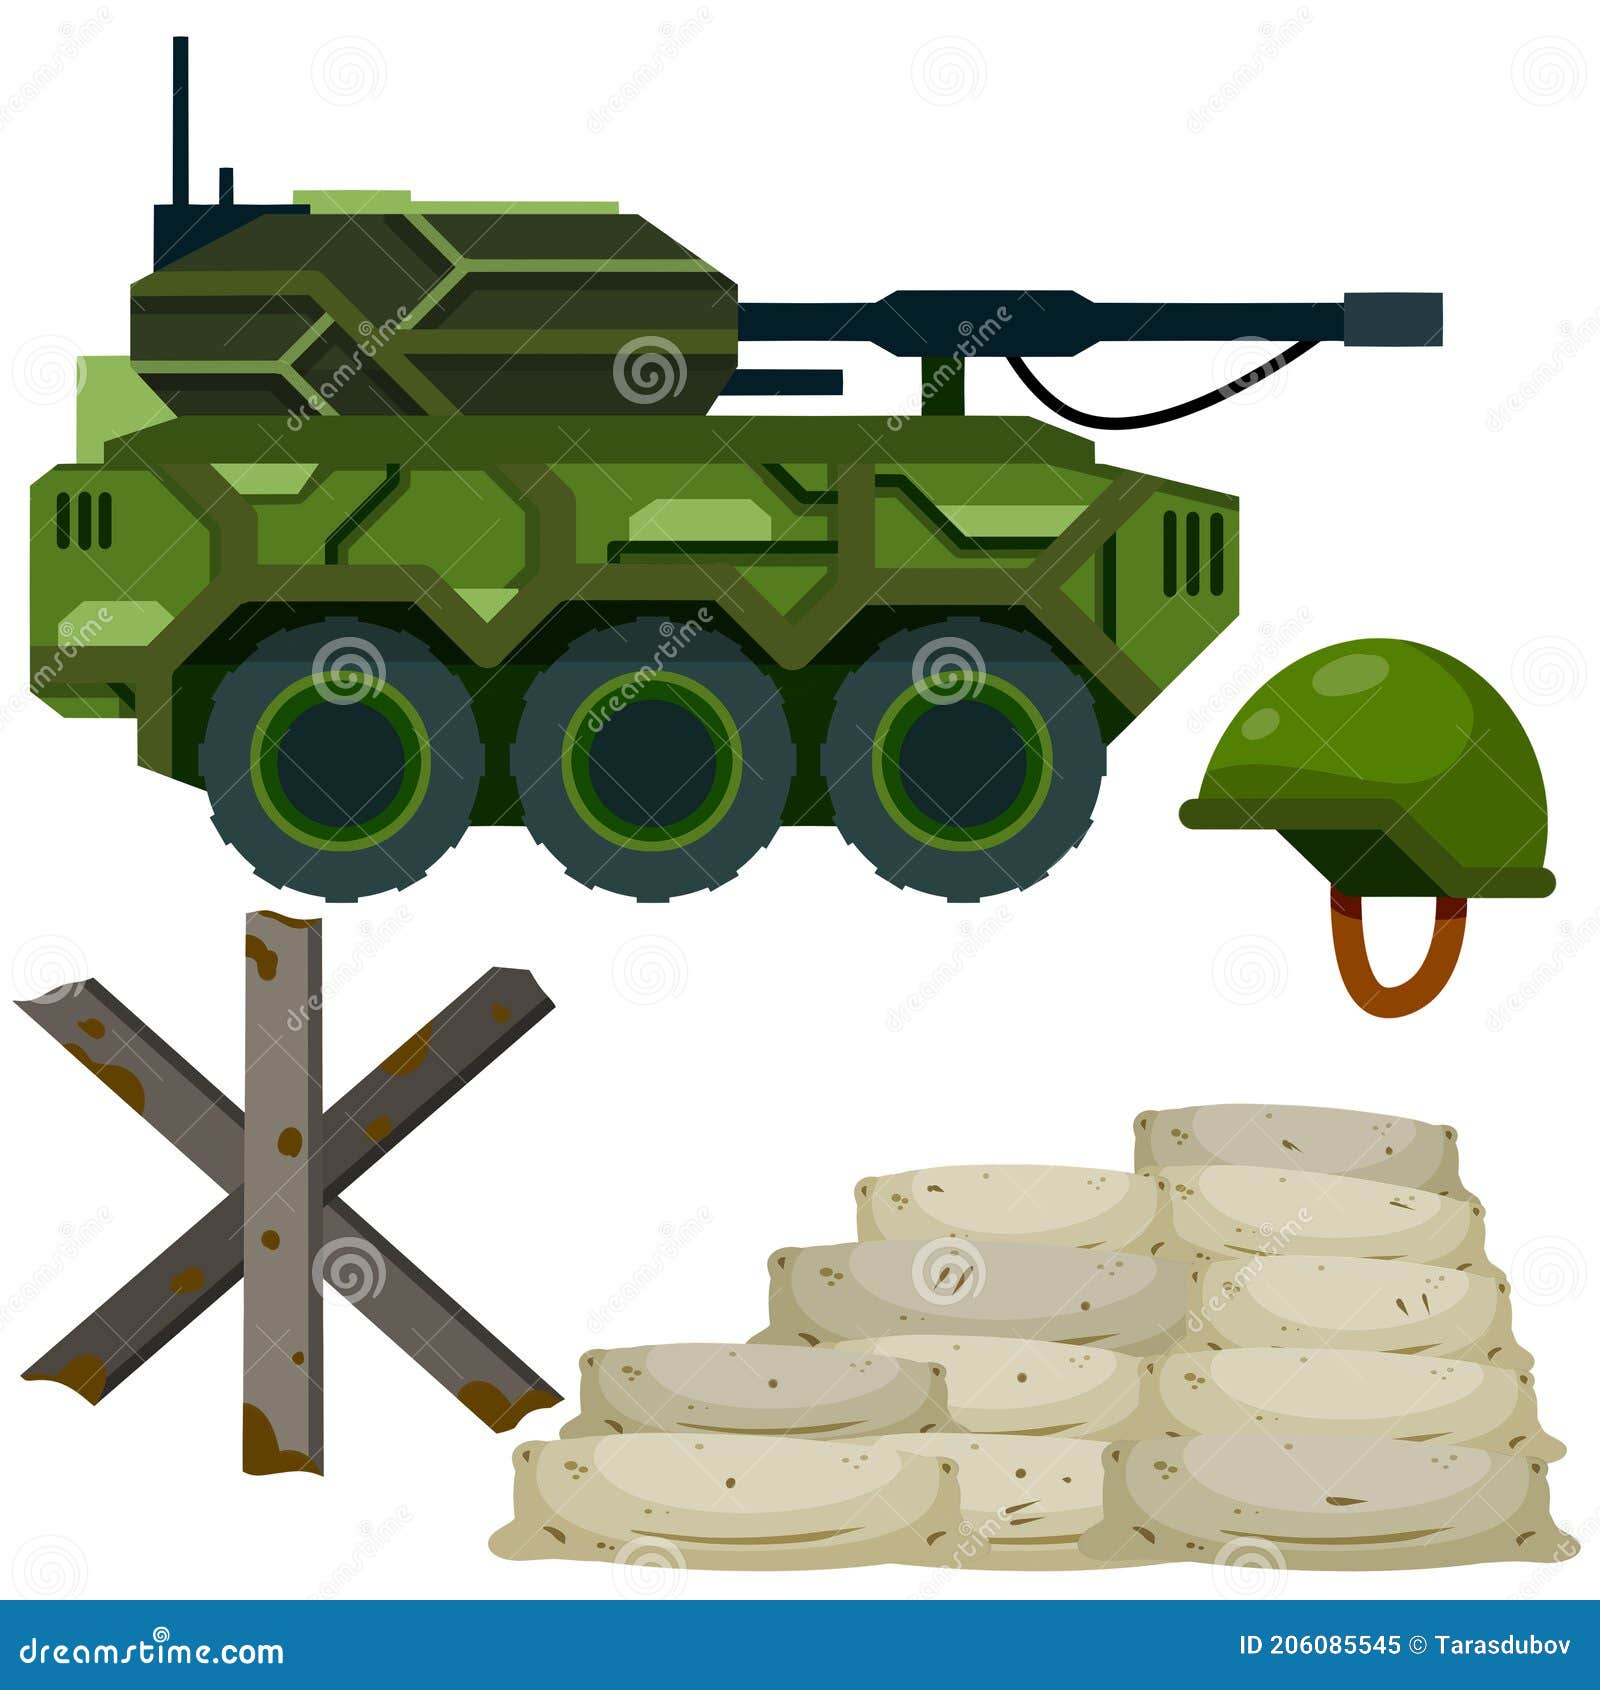 military facility. army base. barricade, firing point. shelter and tank